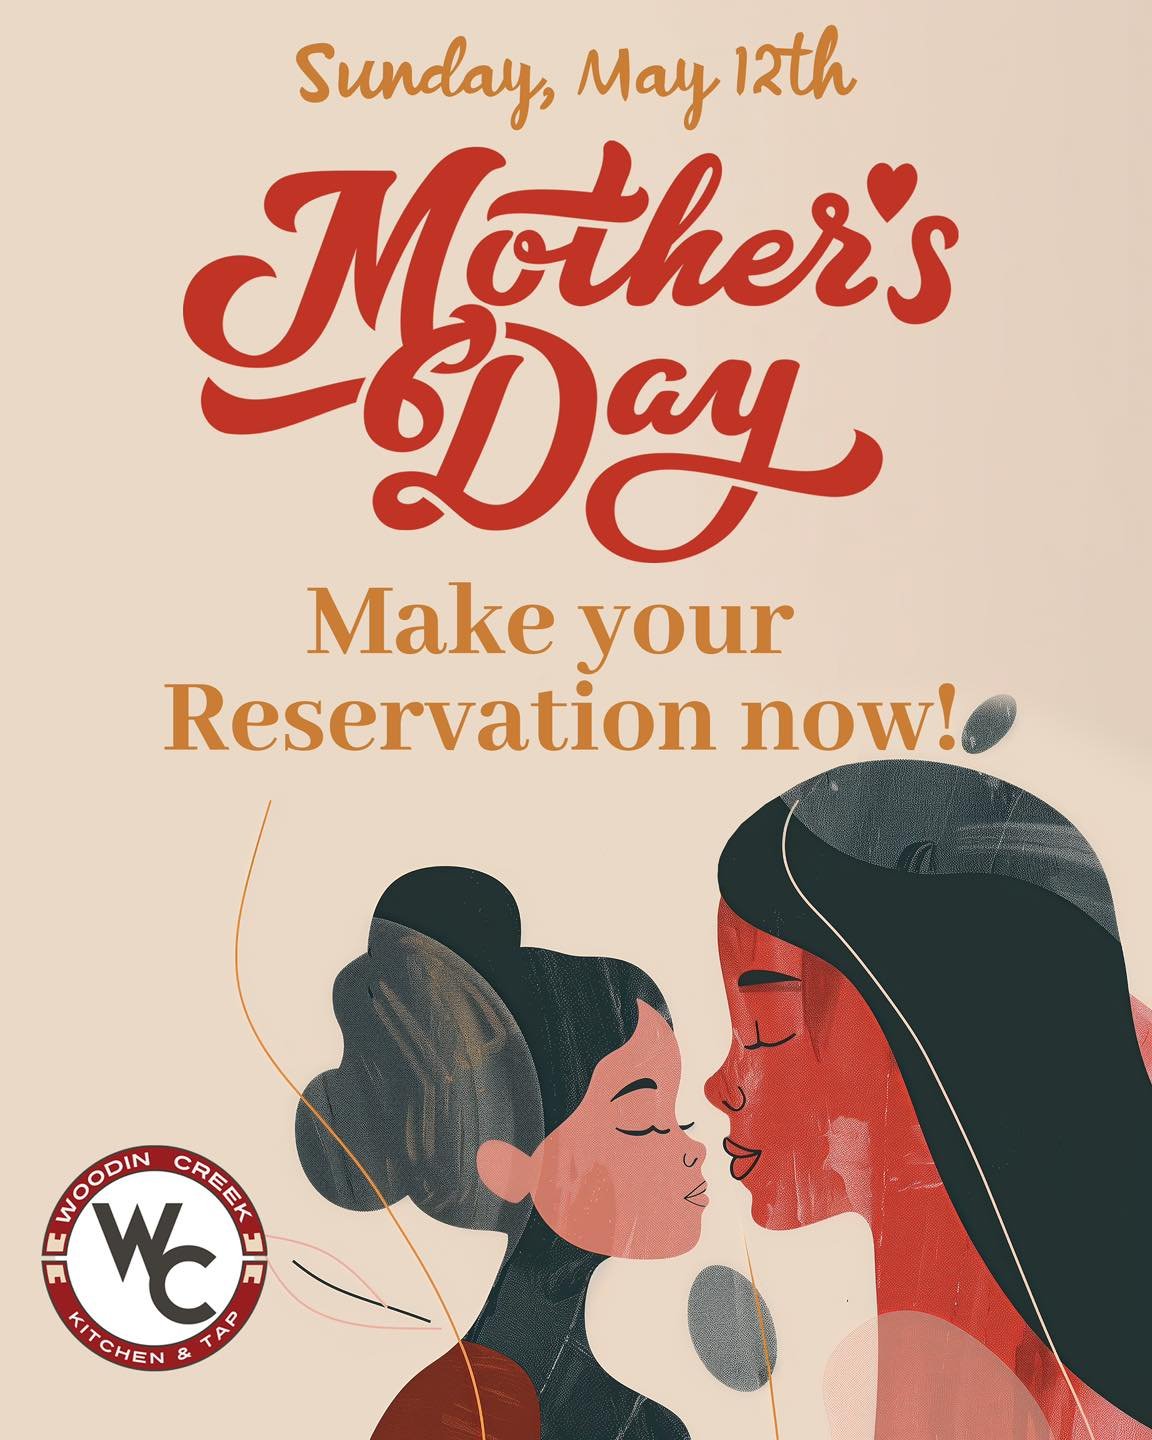 Call and make a reservation for Mother&rsquo;s Day this coming Sunday. We are serving brunch from 10-2pm and lunch/dinner until 9pm. (425)215-1999 #mothersday #woodincreekvillage #wckt